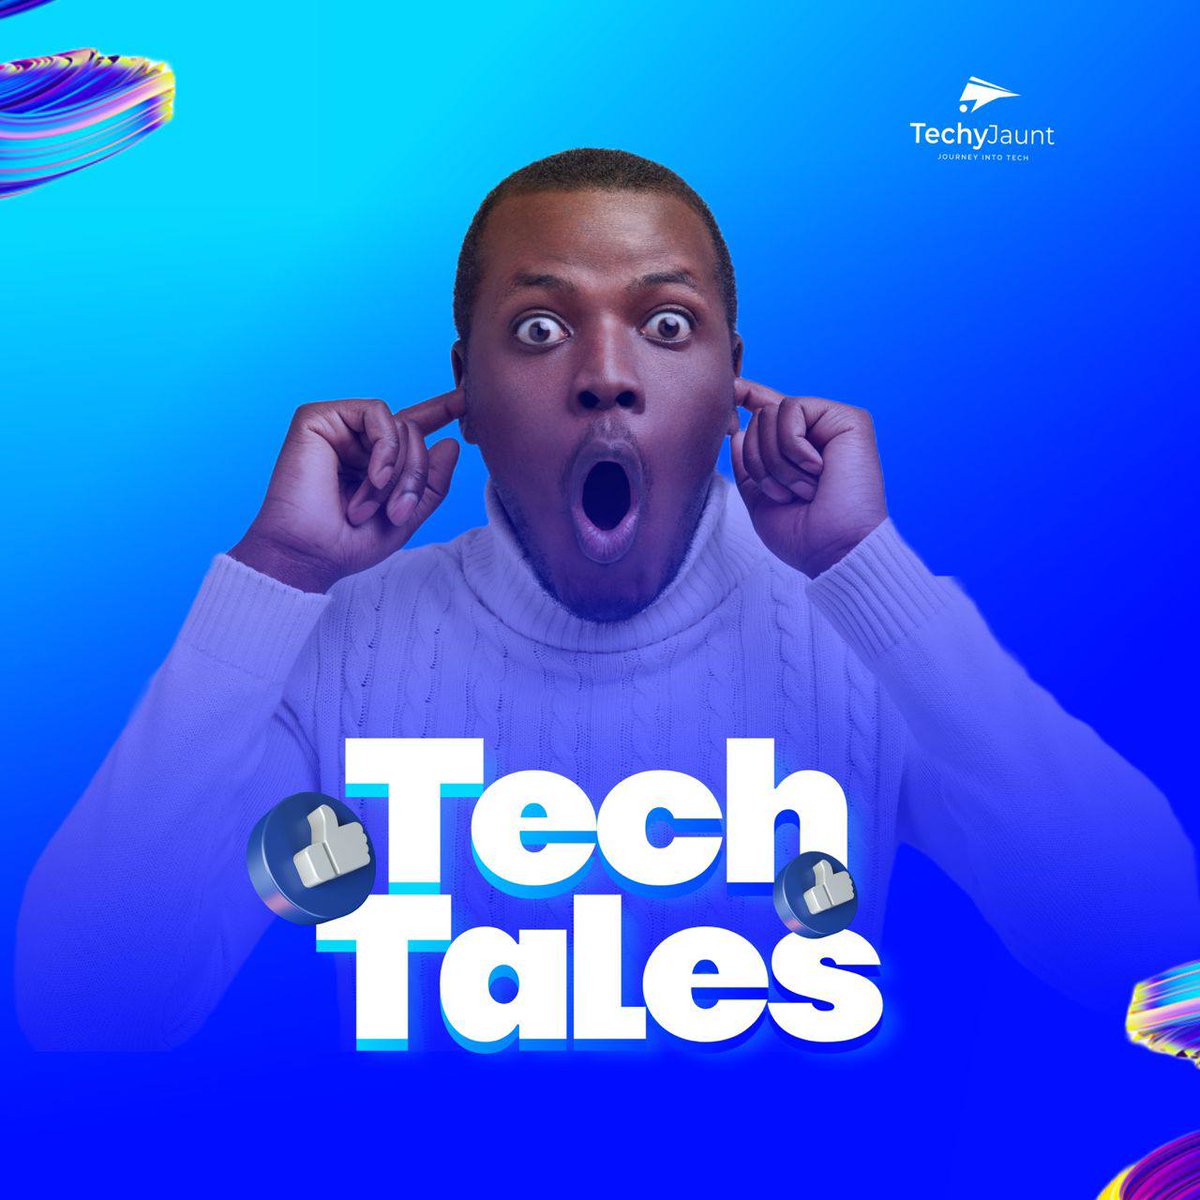 We’re introducing the Techy Jaunt  TECH TALES💬

Do you have a funny tech story or any tech story you will like us to know about ?😄

Click the link and tell us your story👉🏻 forms.gle/o6U23BYZJyLCE3…

NOTE: Your responses will be 💯 anonymous

#tech #crypto #techtales #techjobs